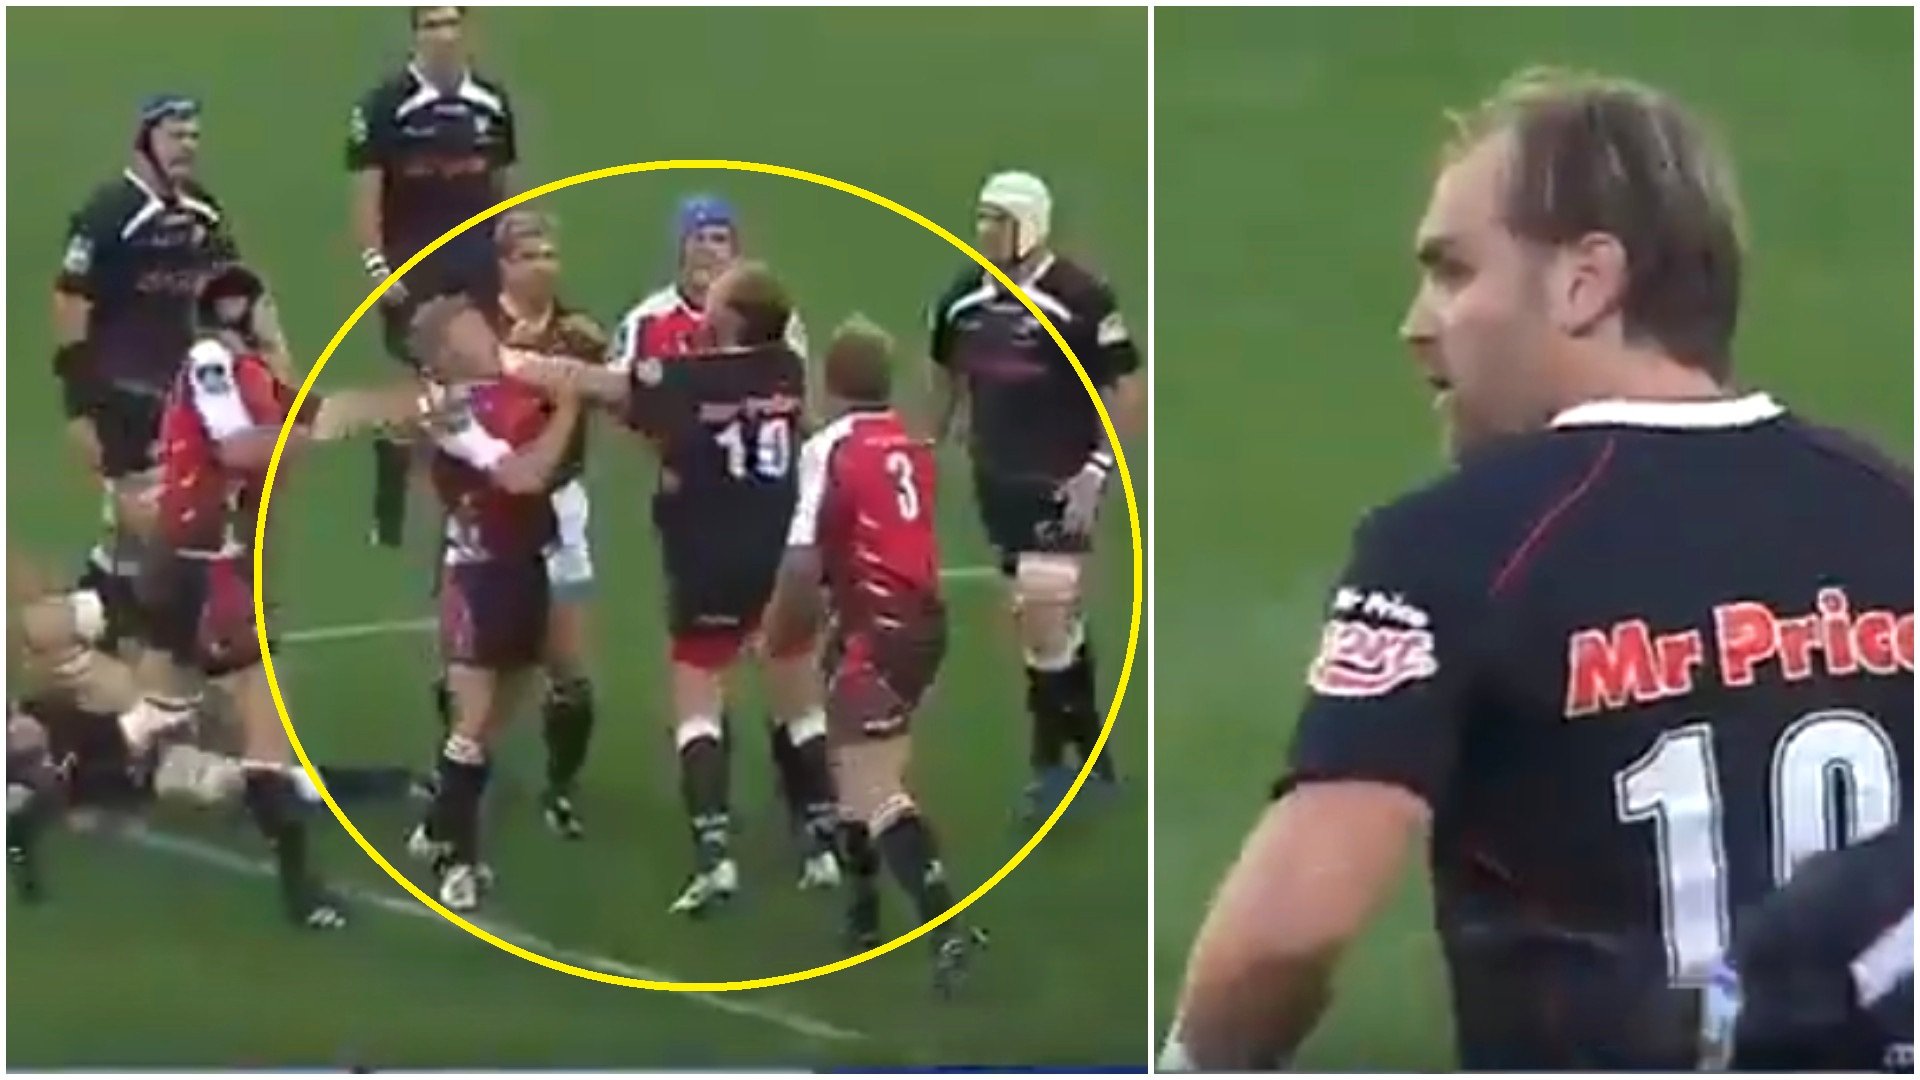 A shredded Andy Goode tussles with Lions player in 2010